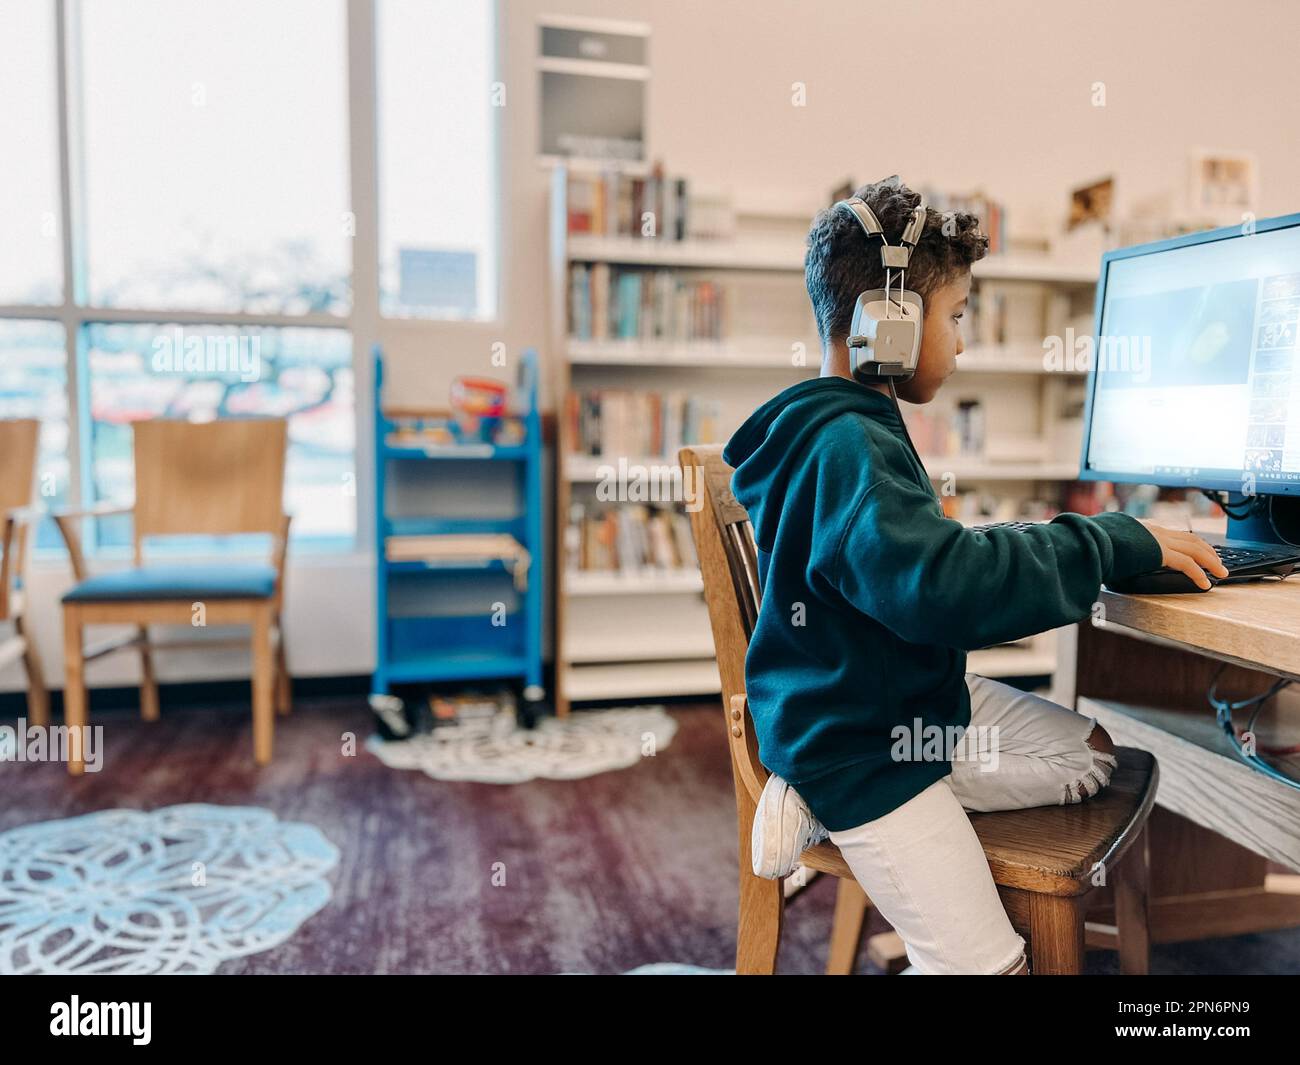 Mixed race boy using computer with bookshelves in background Stock Photo